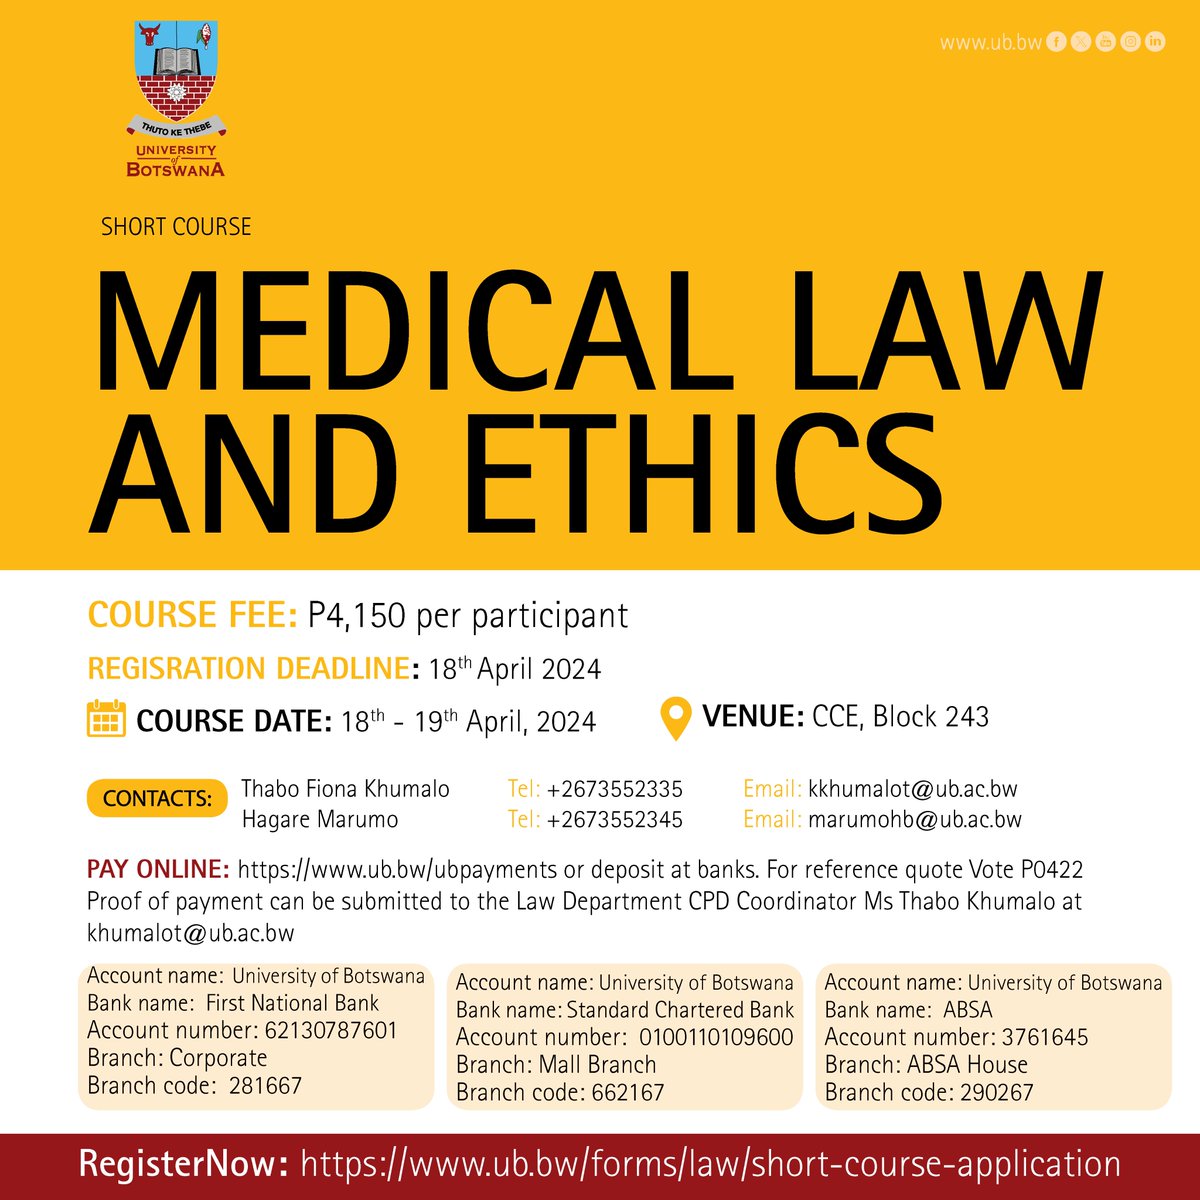 #ShortCourse MEDICAL LAW AND ETHICS Register now: ub.bw/forms/law/shor…